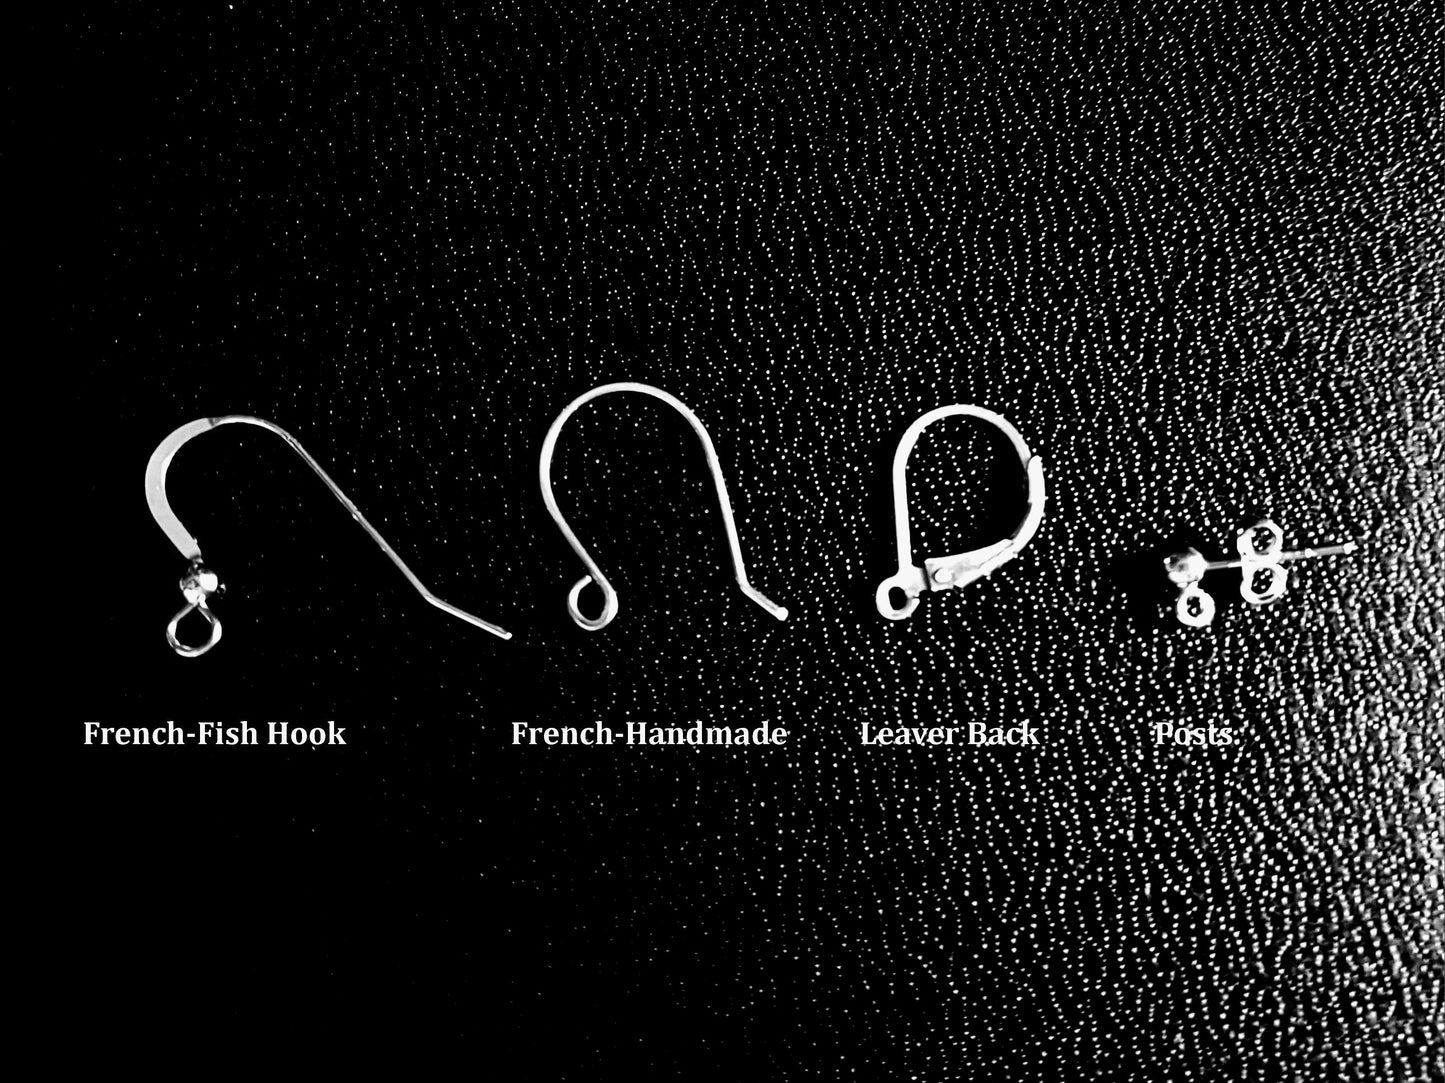  Earring Wire Styles: French-Fish Hooks, French-Handmade, Leaver Back, Posts